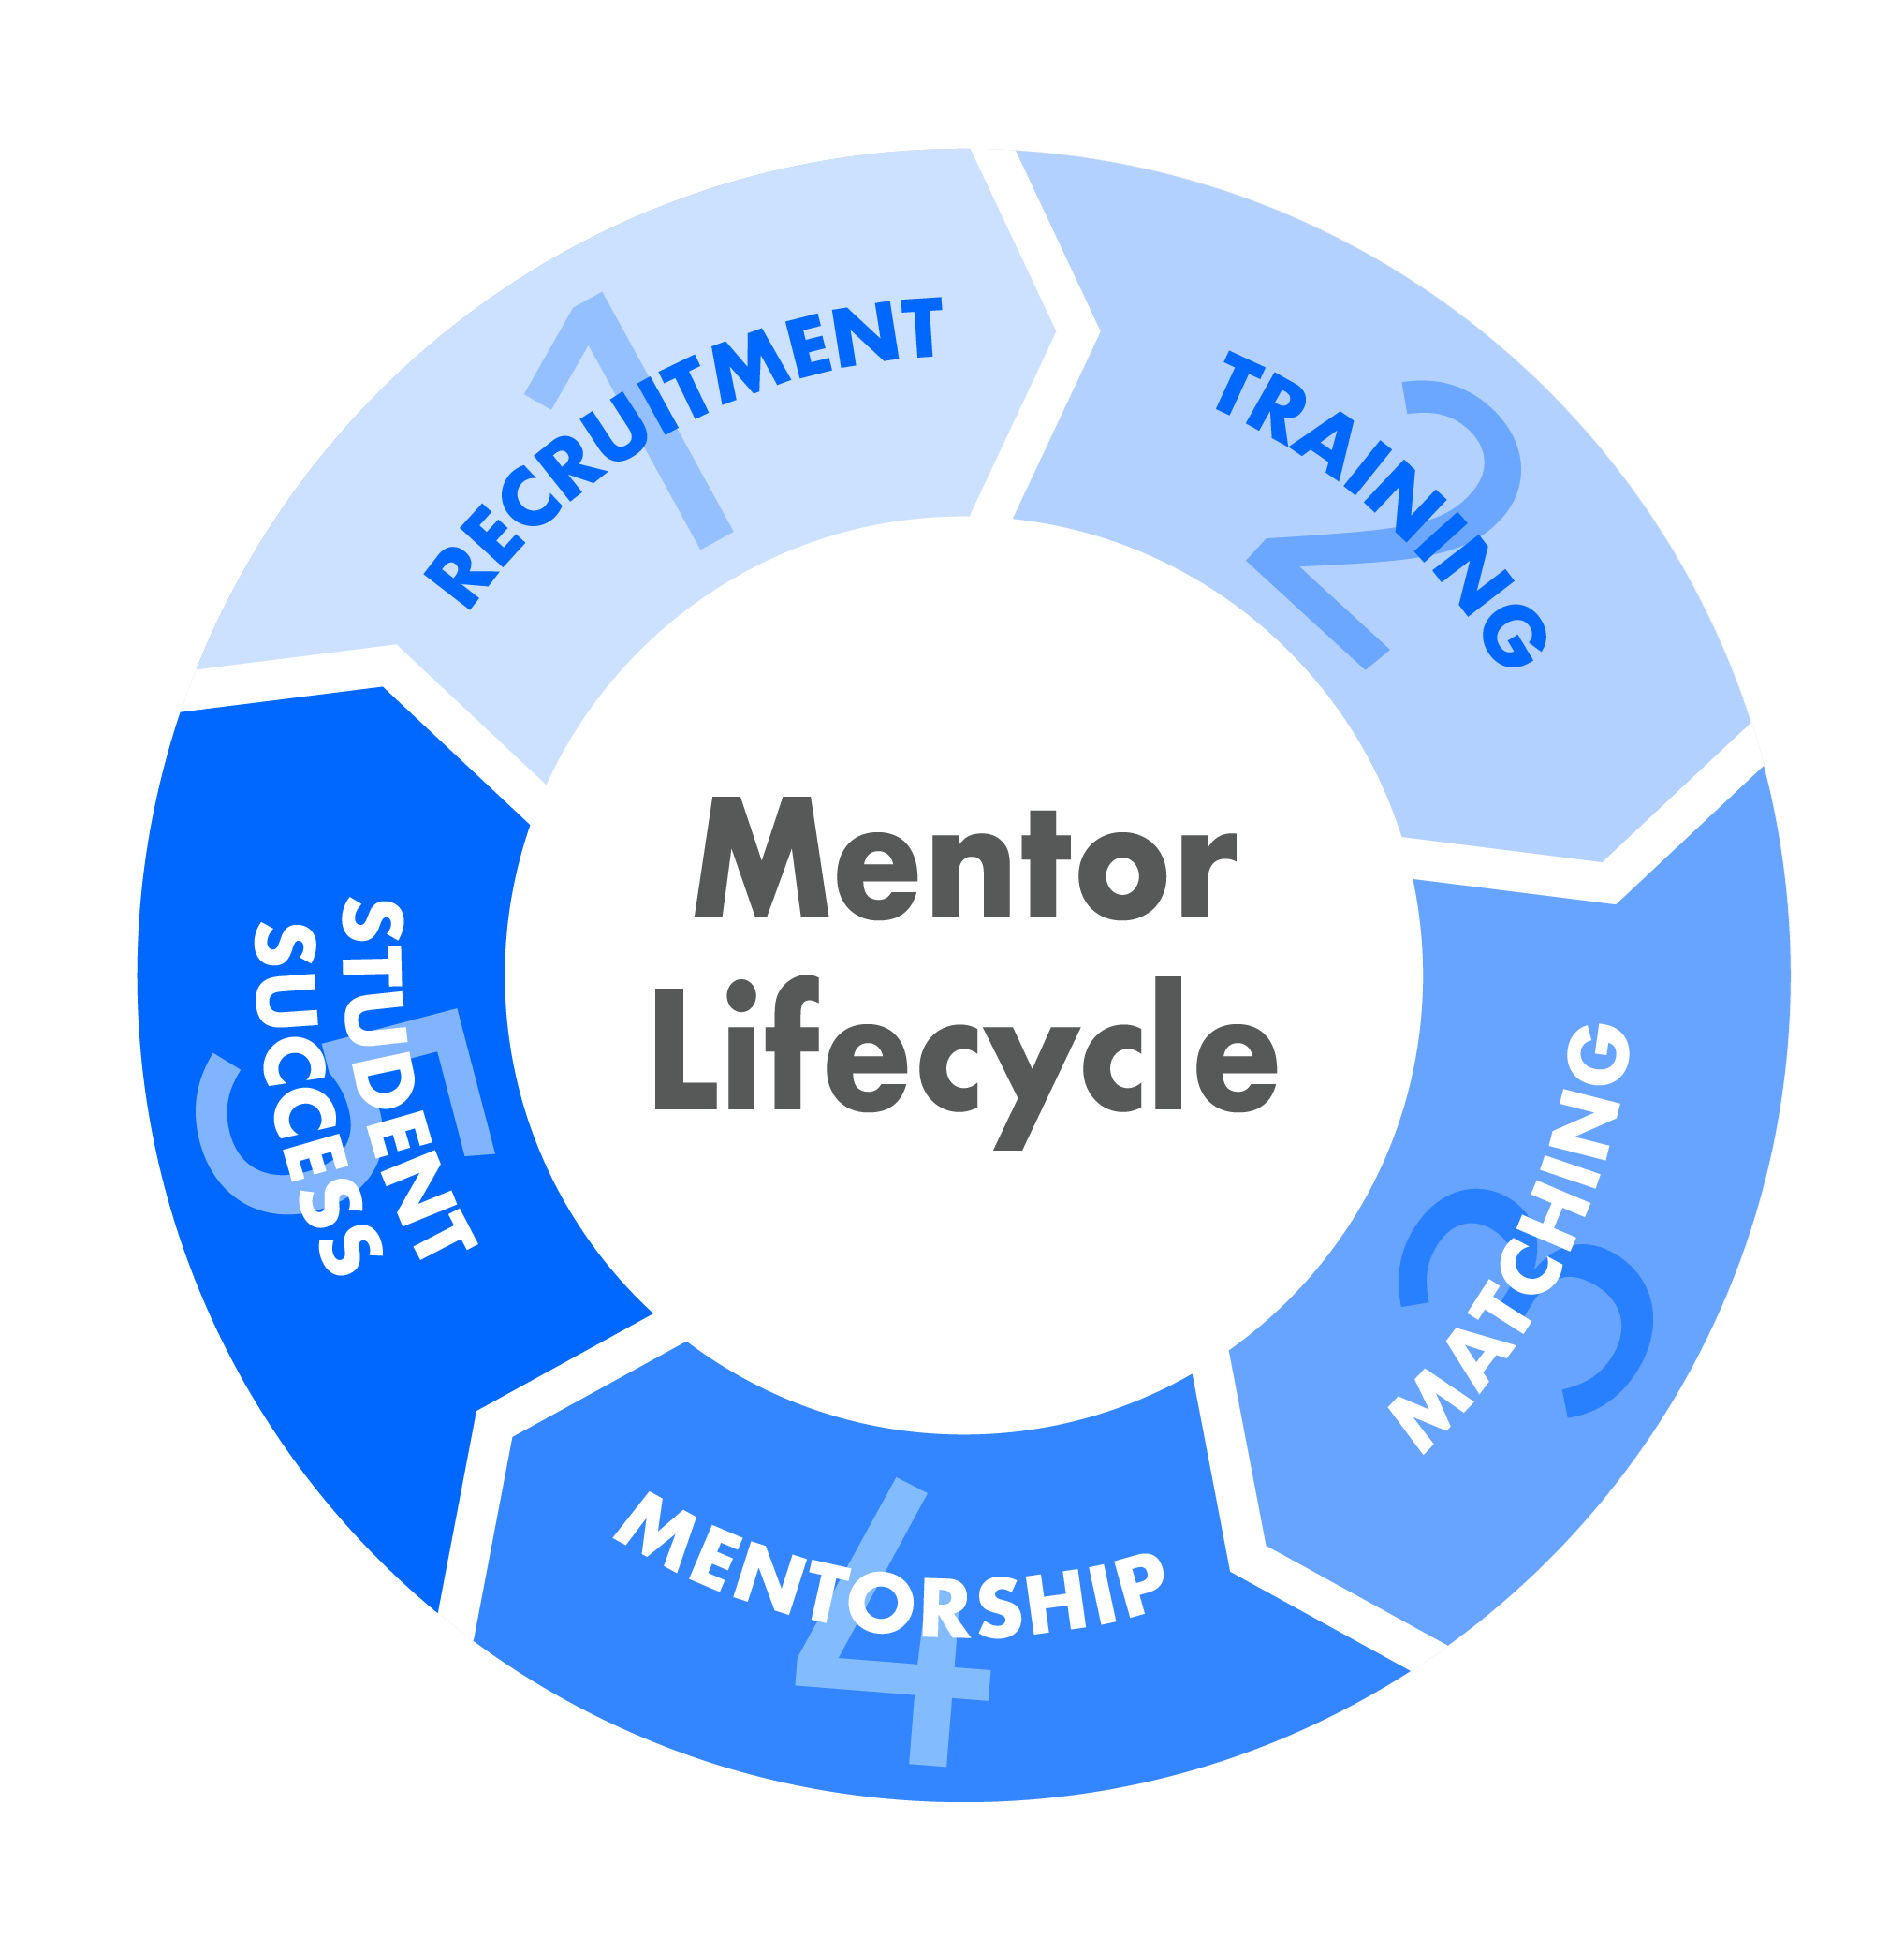 Mentor Lifecycle